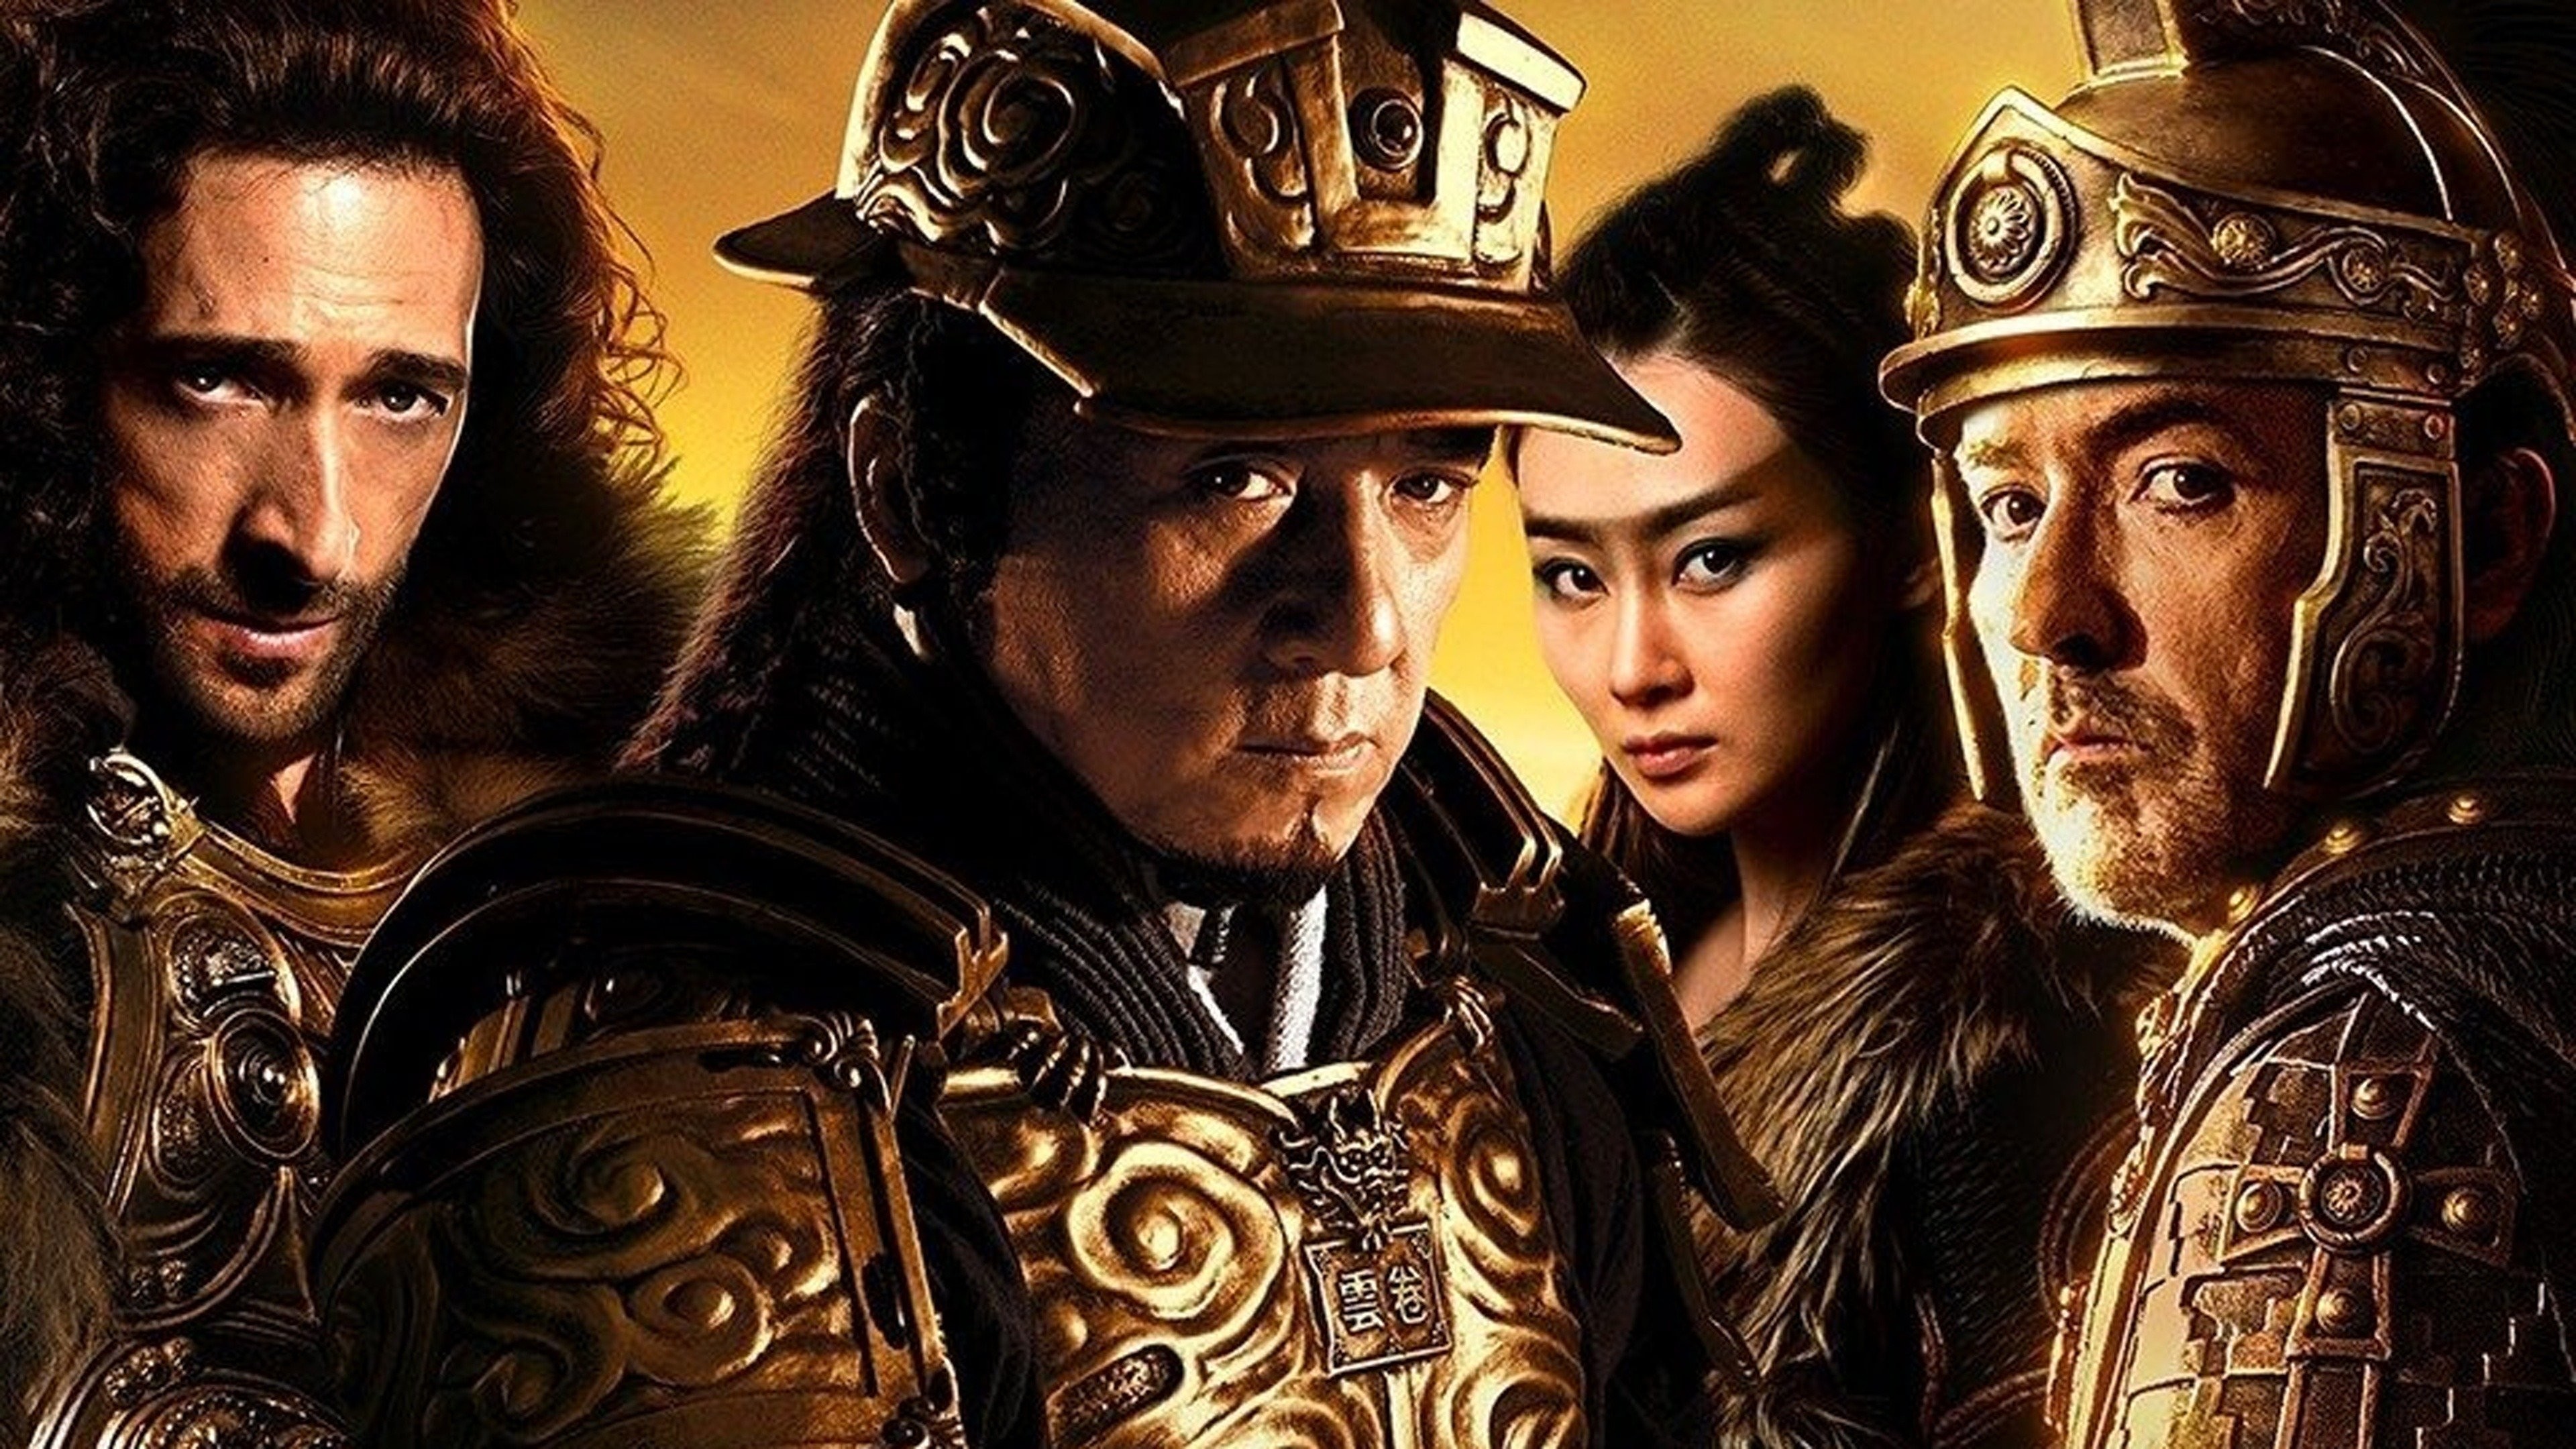 Dragon Blade: The Beginning - Rotten Tomatoes